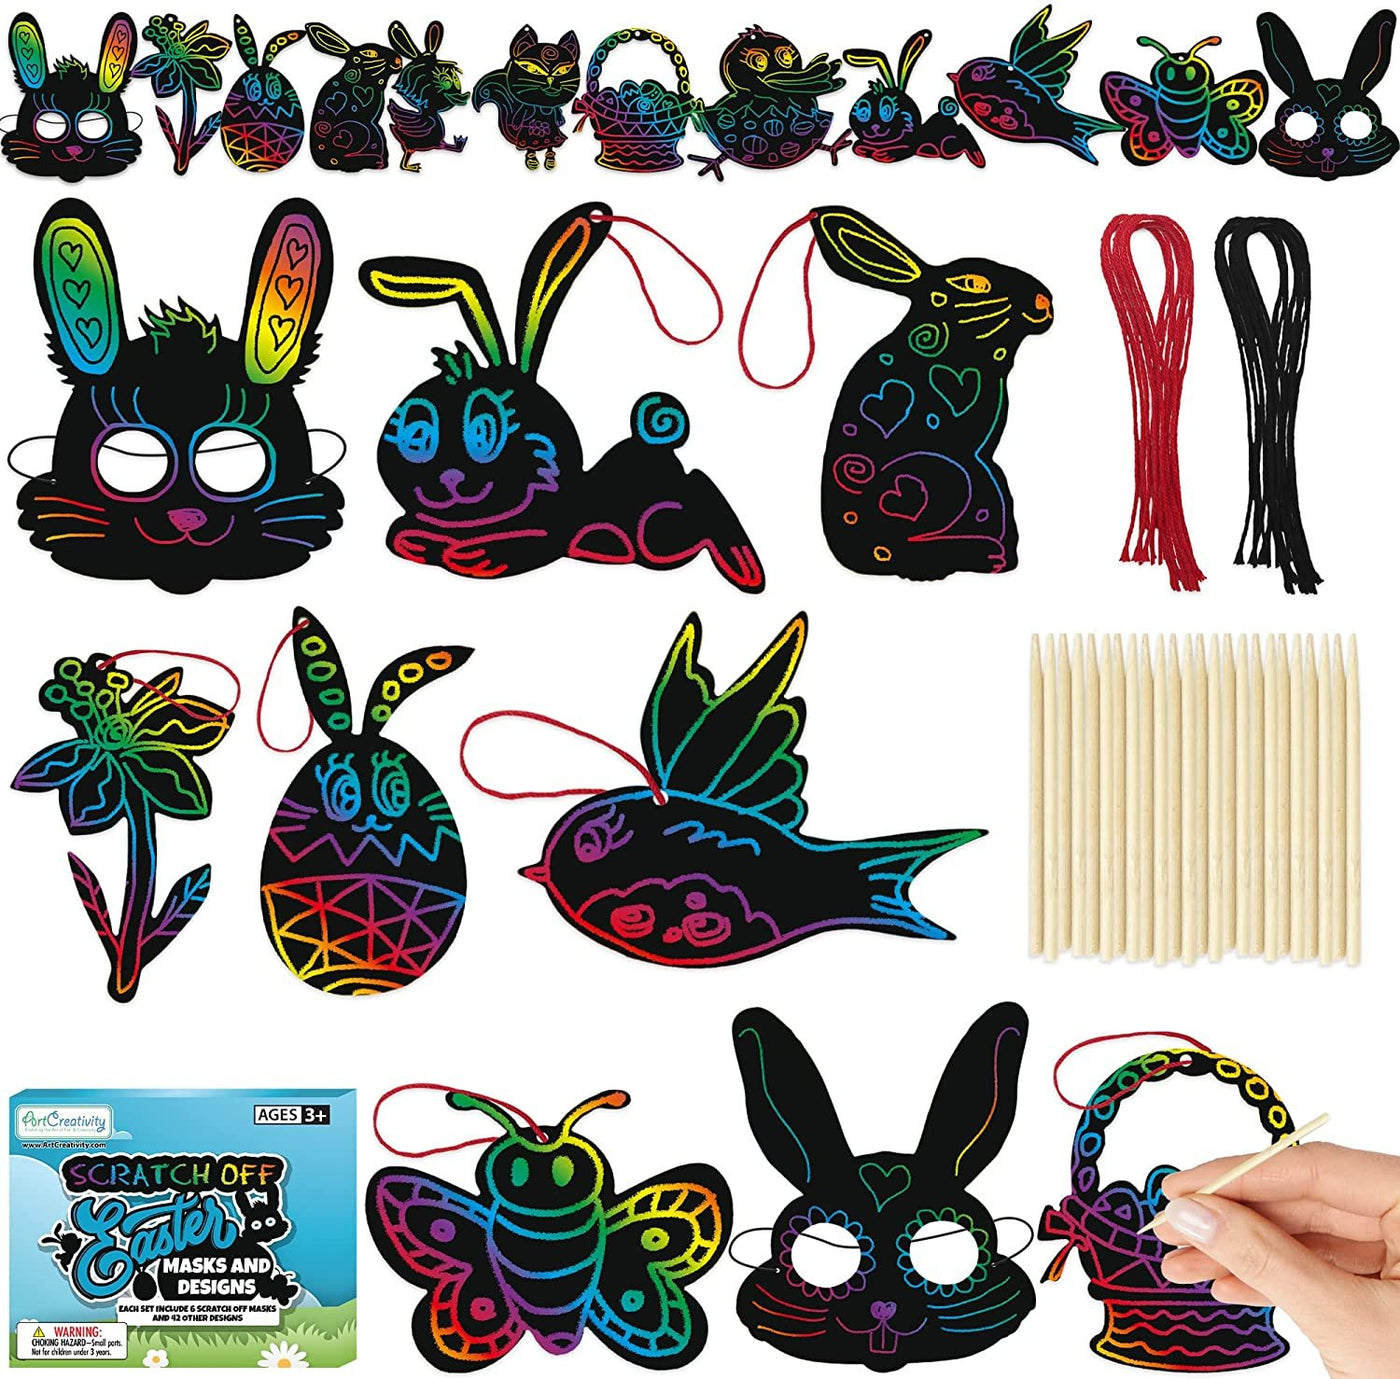 ArtCreativity 48 Pack Easter Scratch Art Set for Kids, Set of 48 Scratch Art Ornaments, Wooden Stick, & Ribbon, Easter Kids Crafts, Rainbow Scratch Ornaments for Home Tree Decor & Easter Party Favors